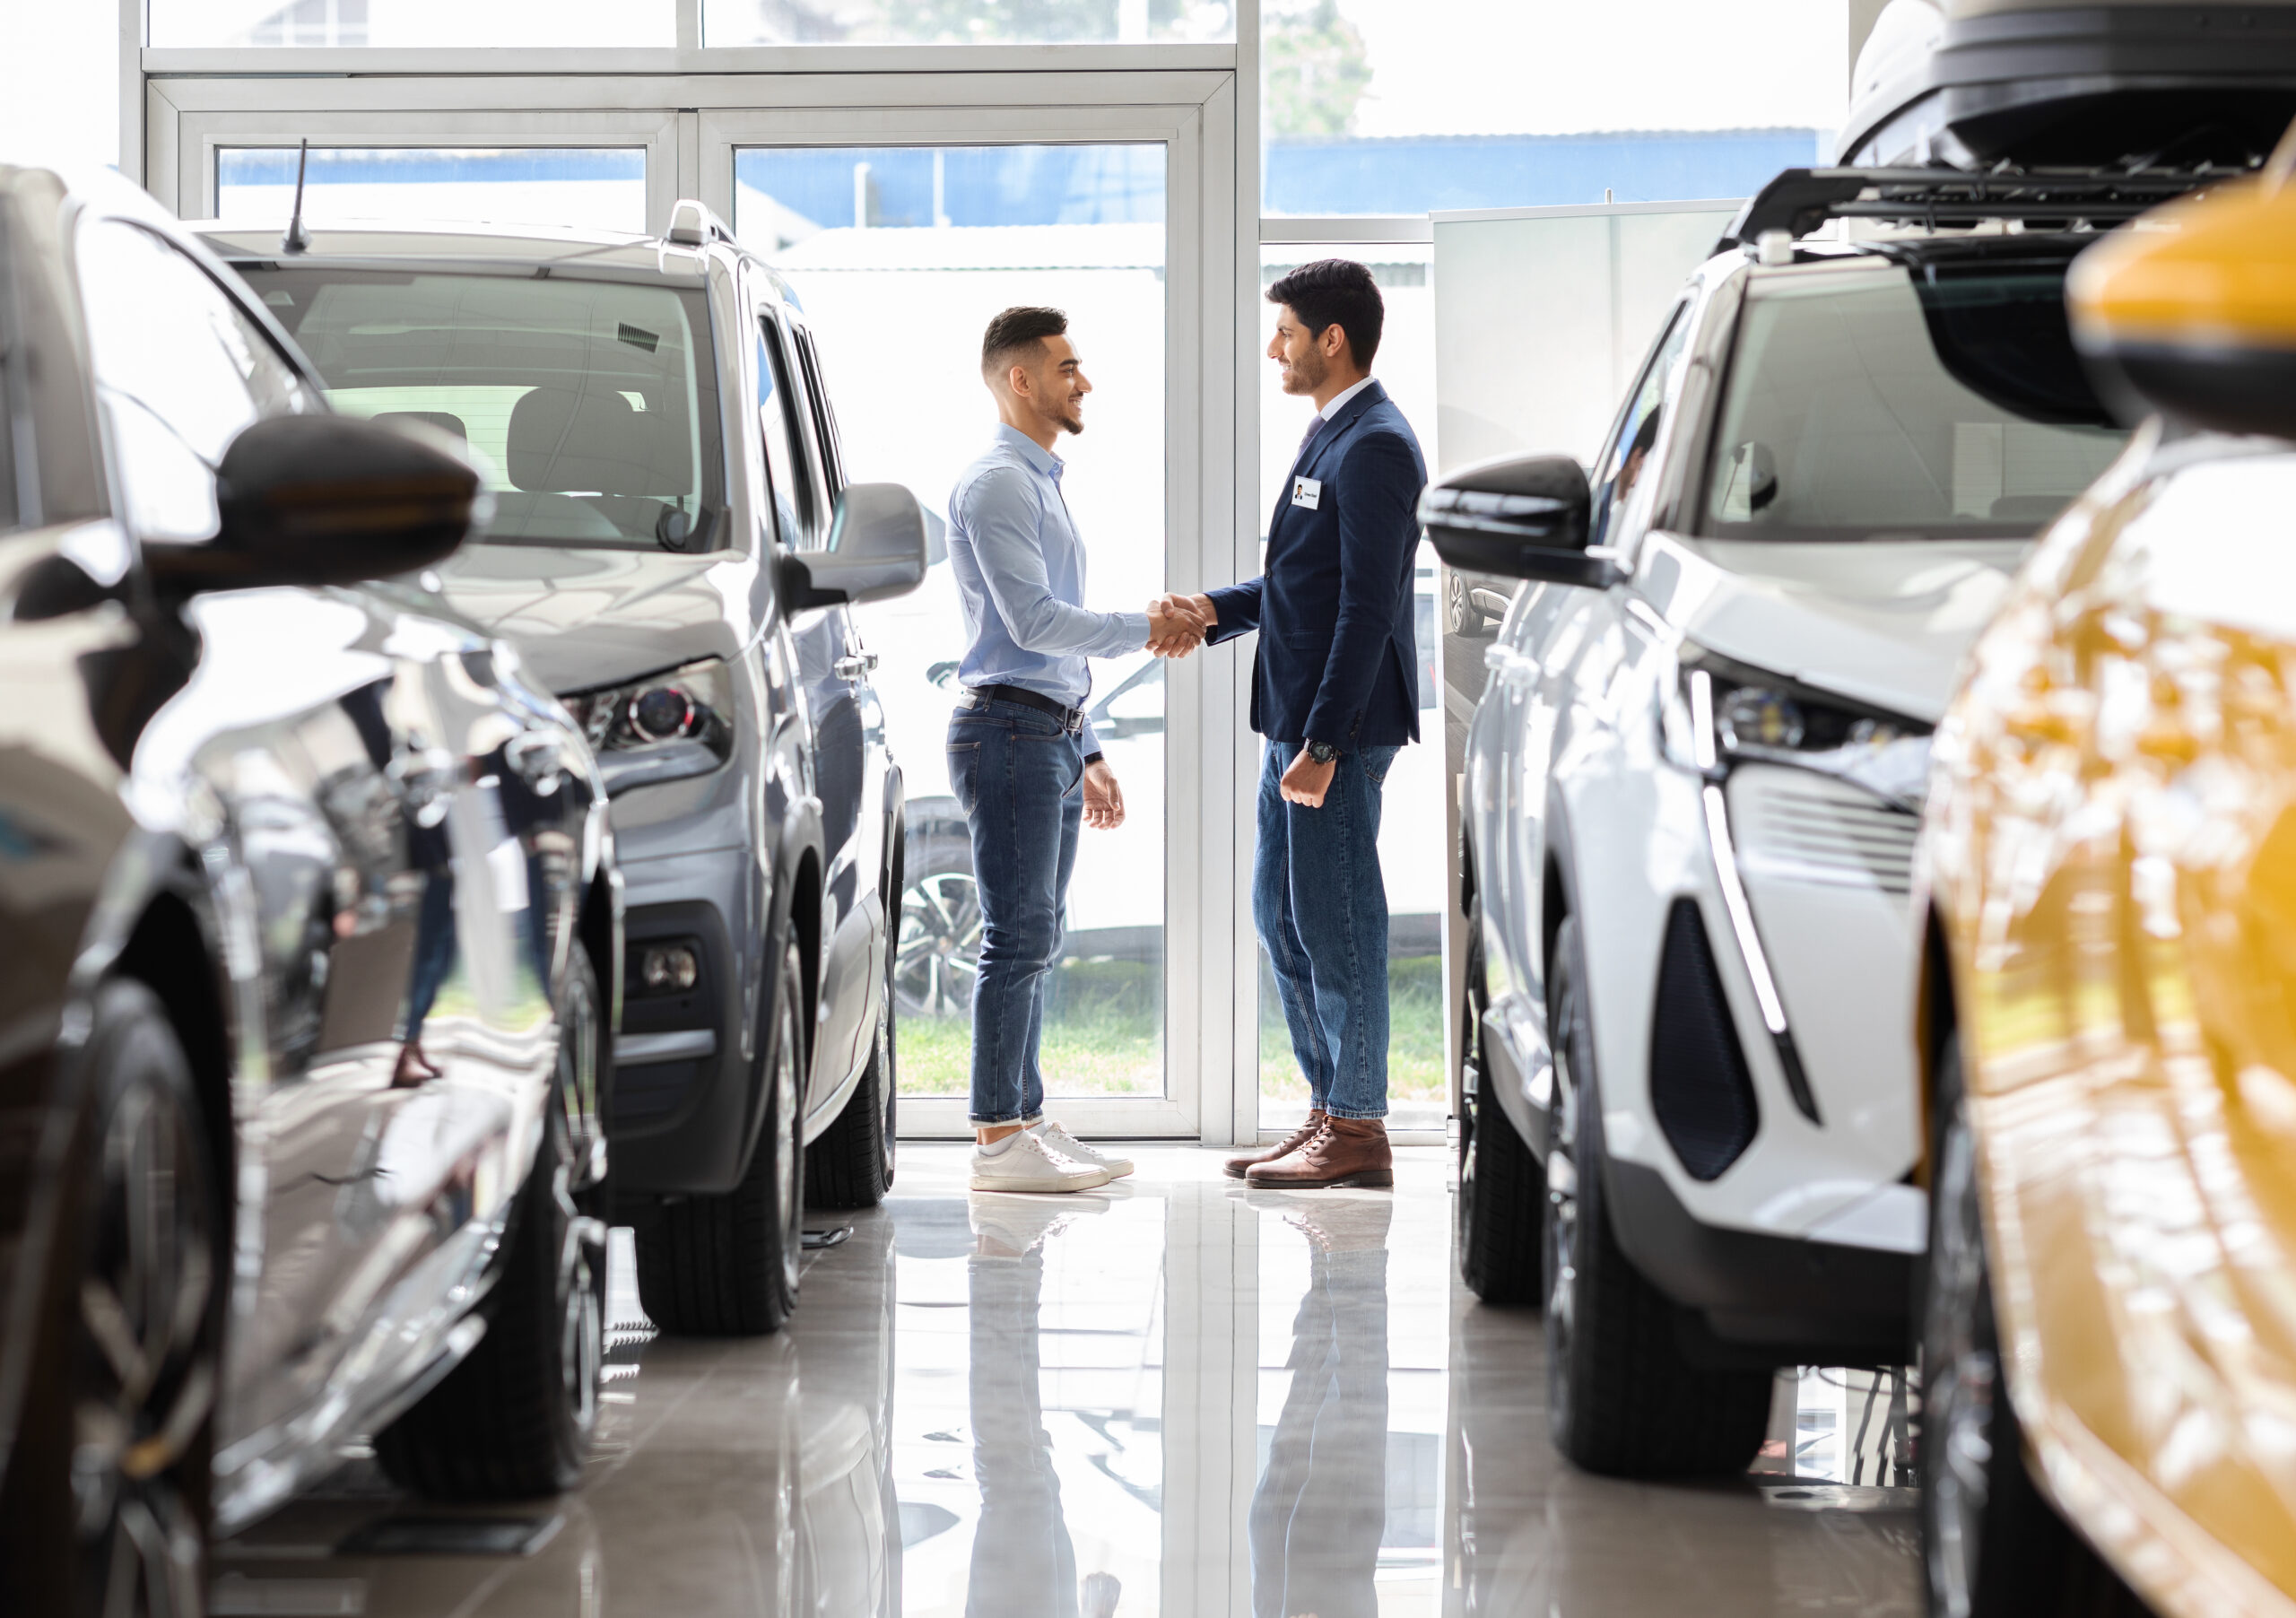 10X Lead Engagement at Your Dealership with 5 Expert Techniques!